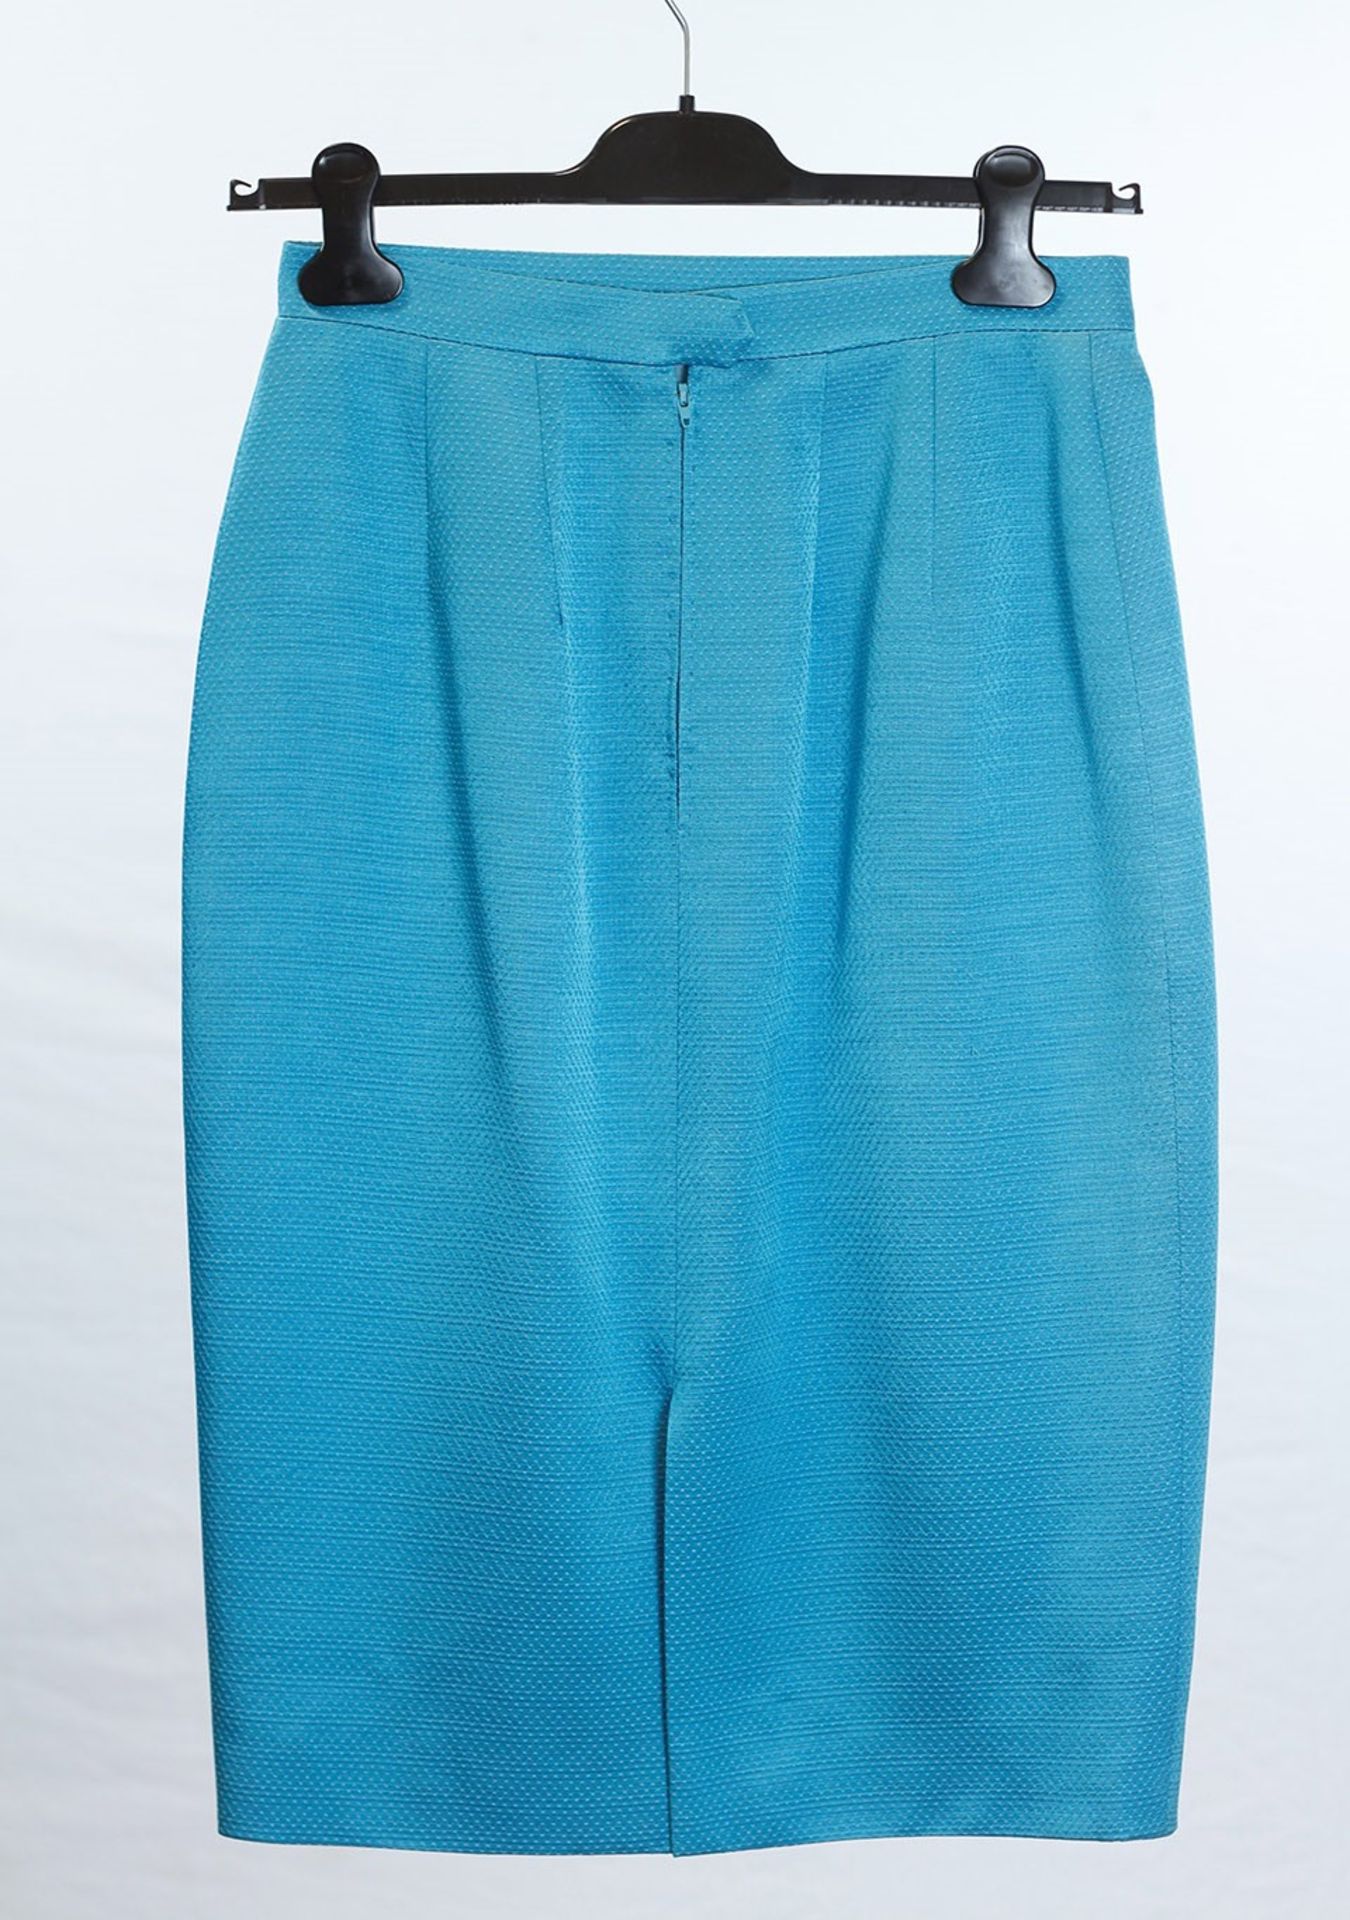 1 x Boutique Le Duc Blue Skirt Suit - Size: 12 - Material: 100% Cotton - From a High End Clothing - Image 8 of 14